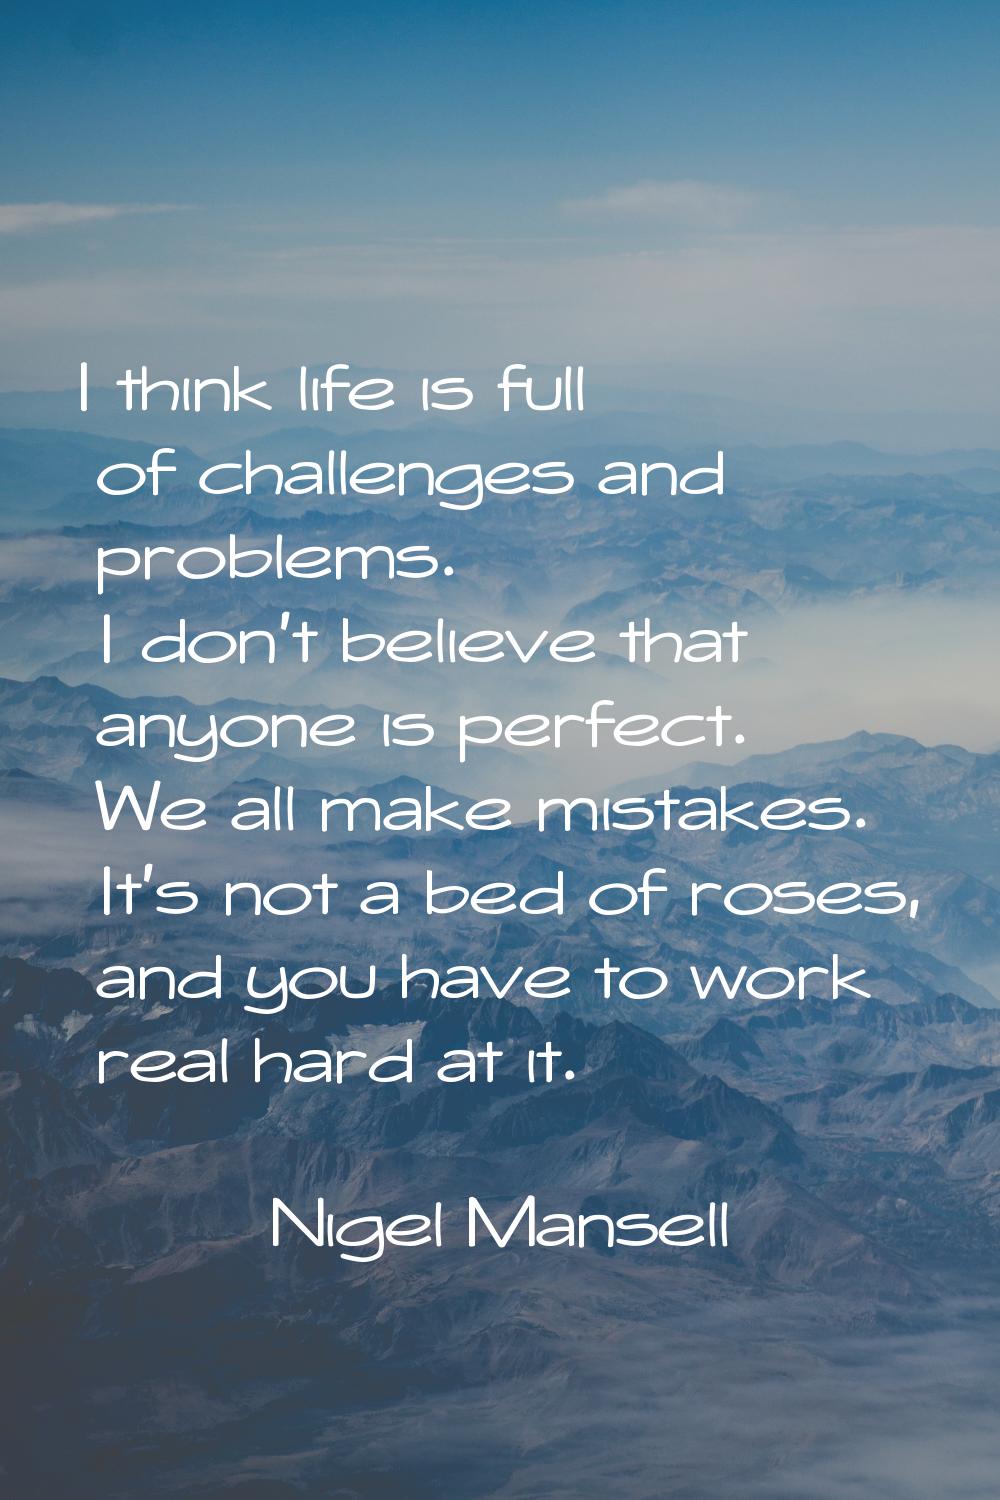 I think life is full of challenges and problems. I don't believe that anyone is perfect. We all mak